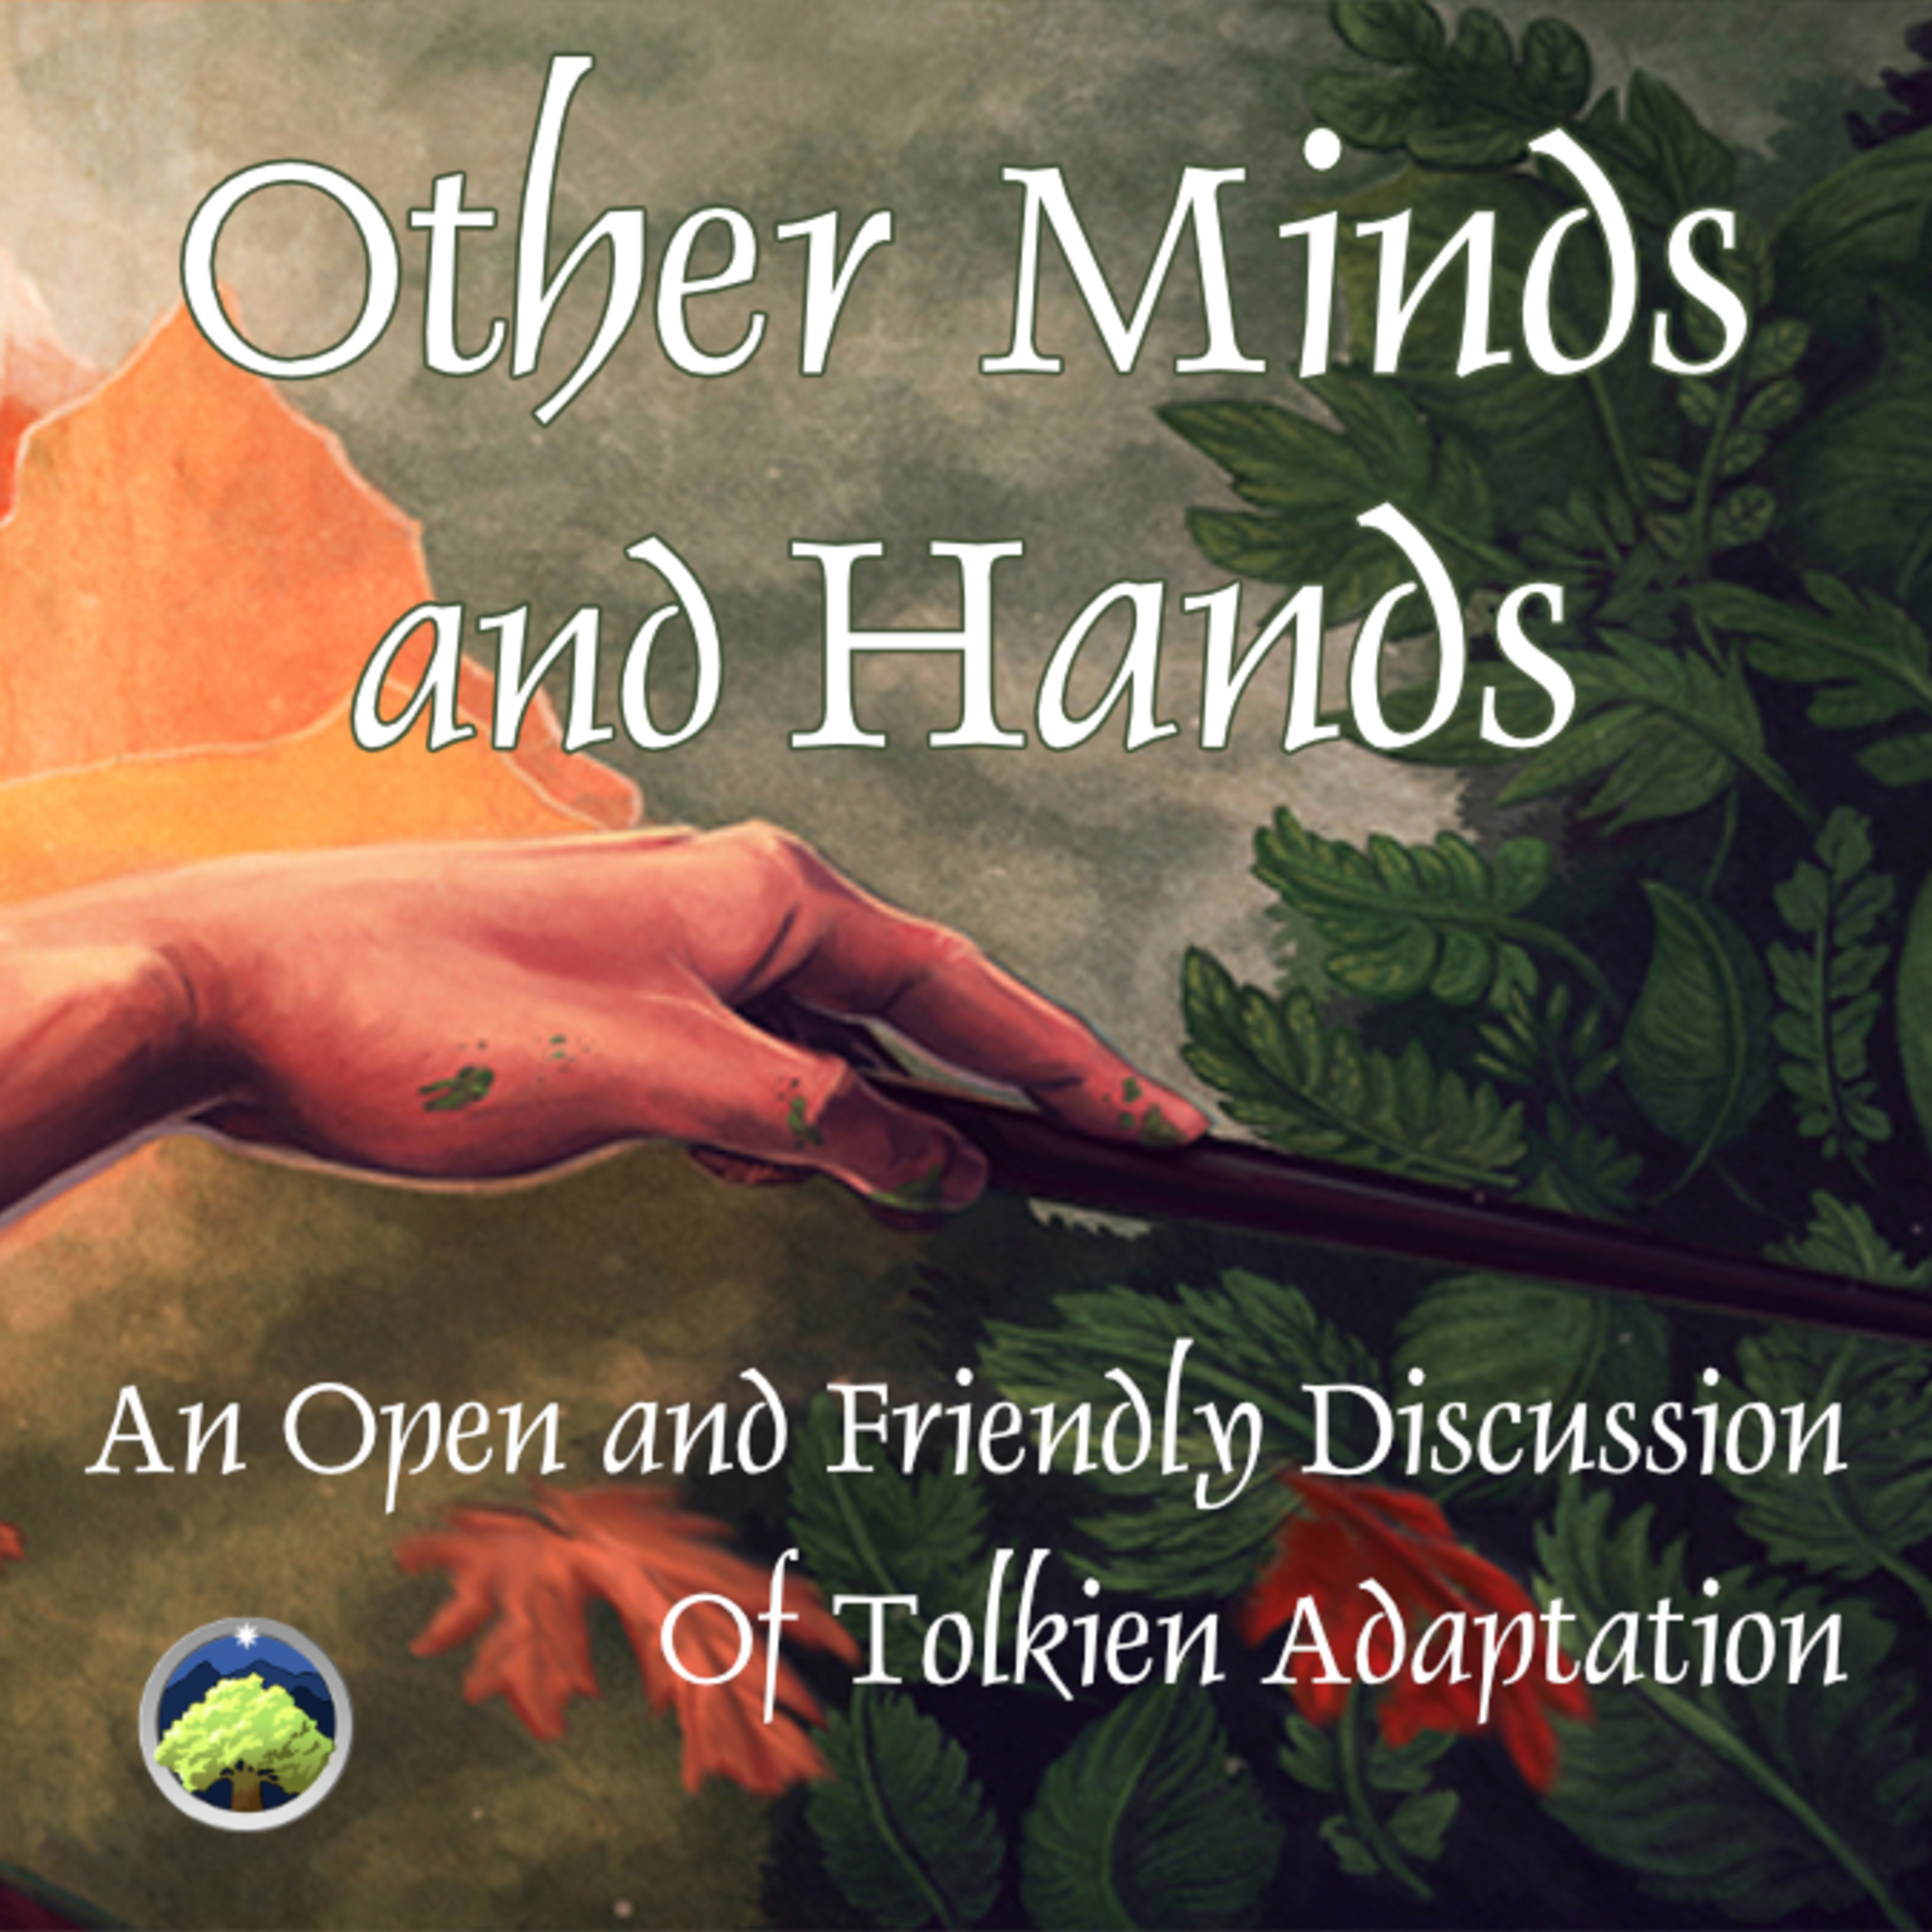 555: Other Minds and Hands, Episode 60